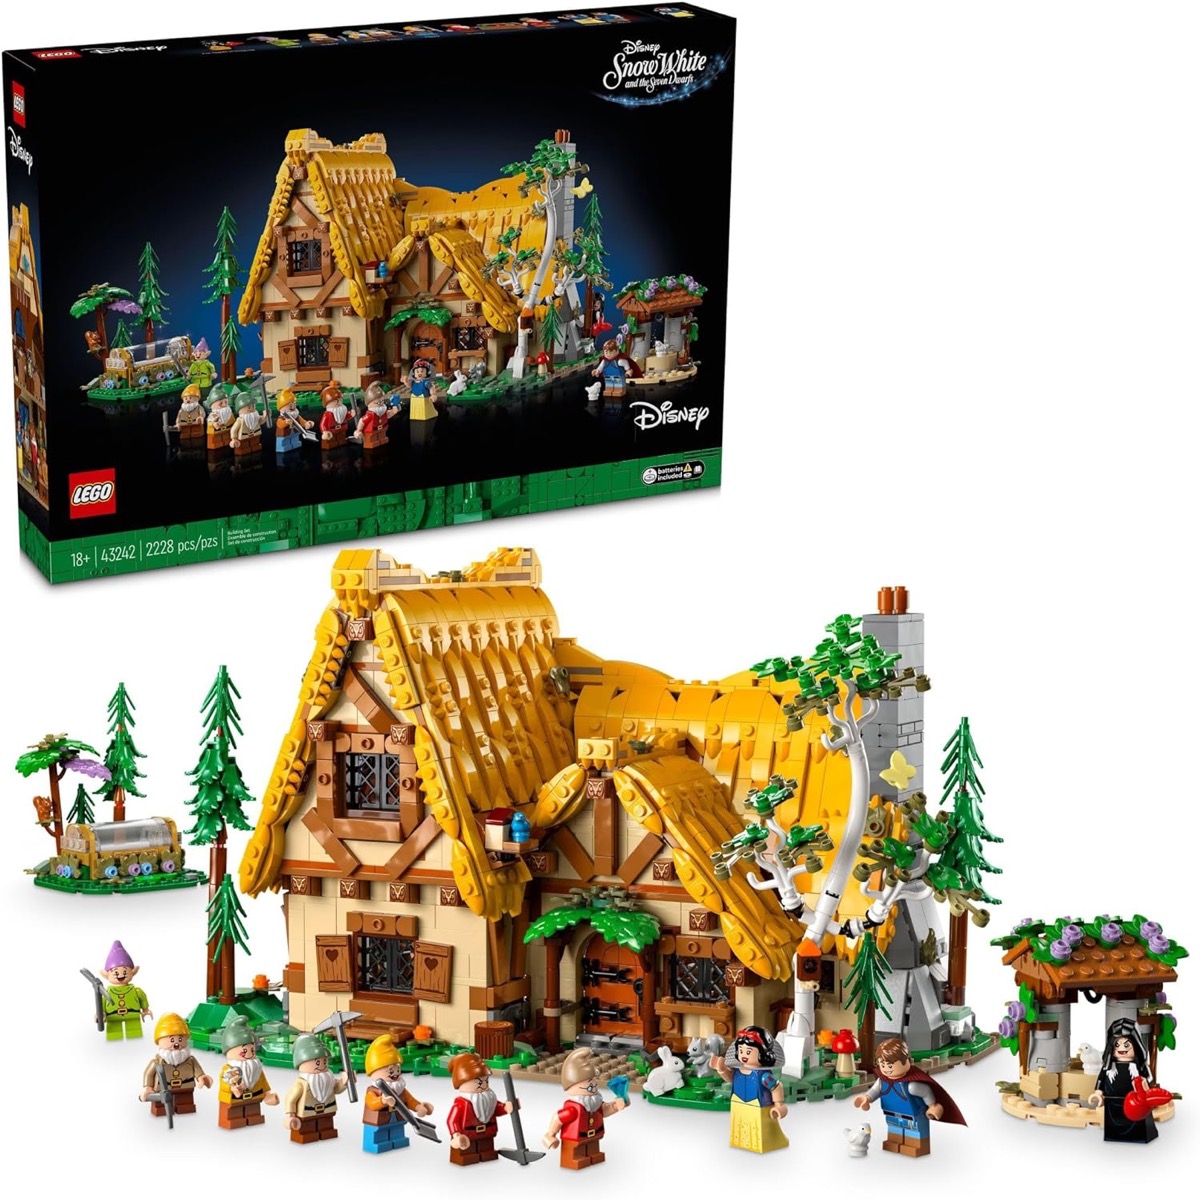 A LEGO version of Snow White and The Seven Dwarfs' Cottage